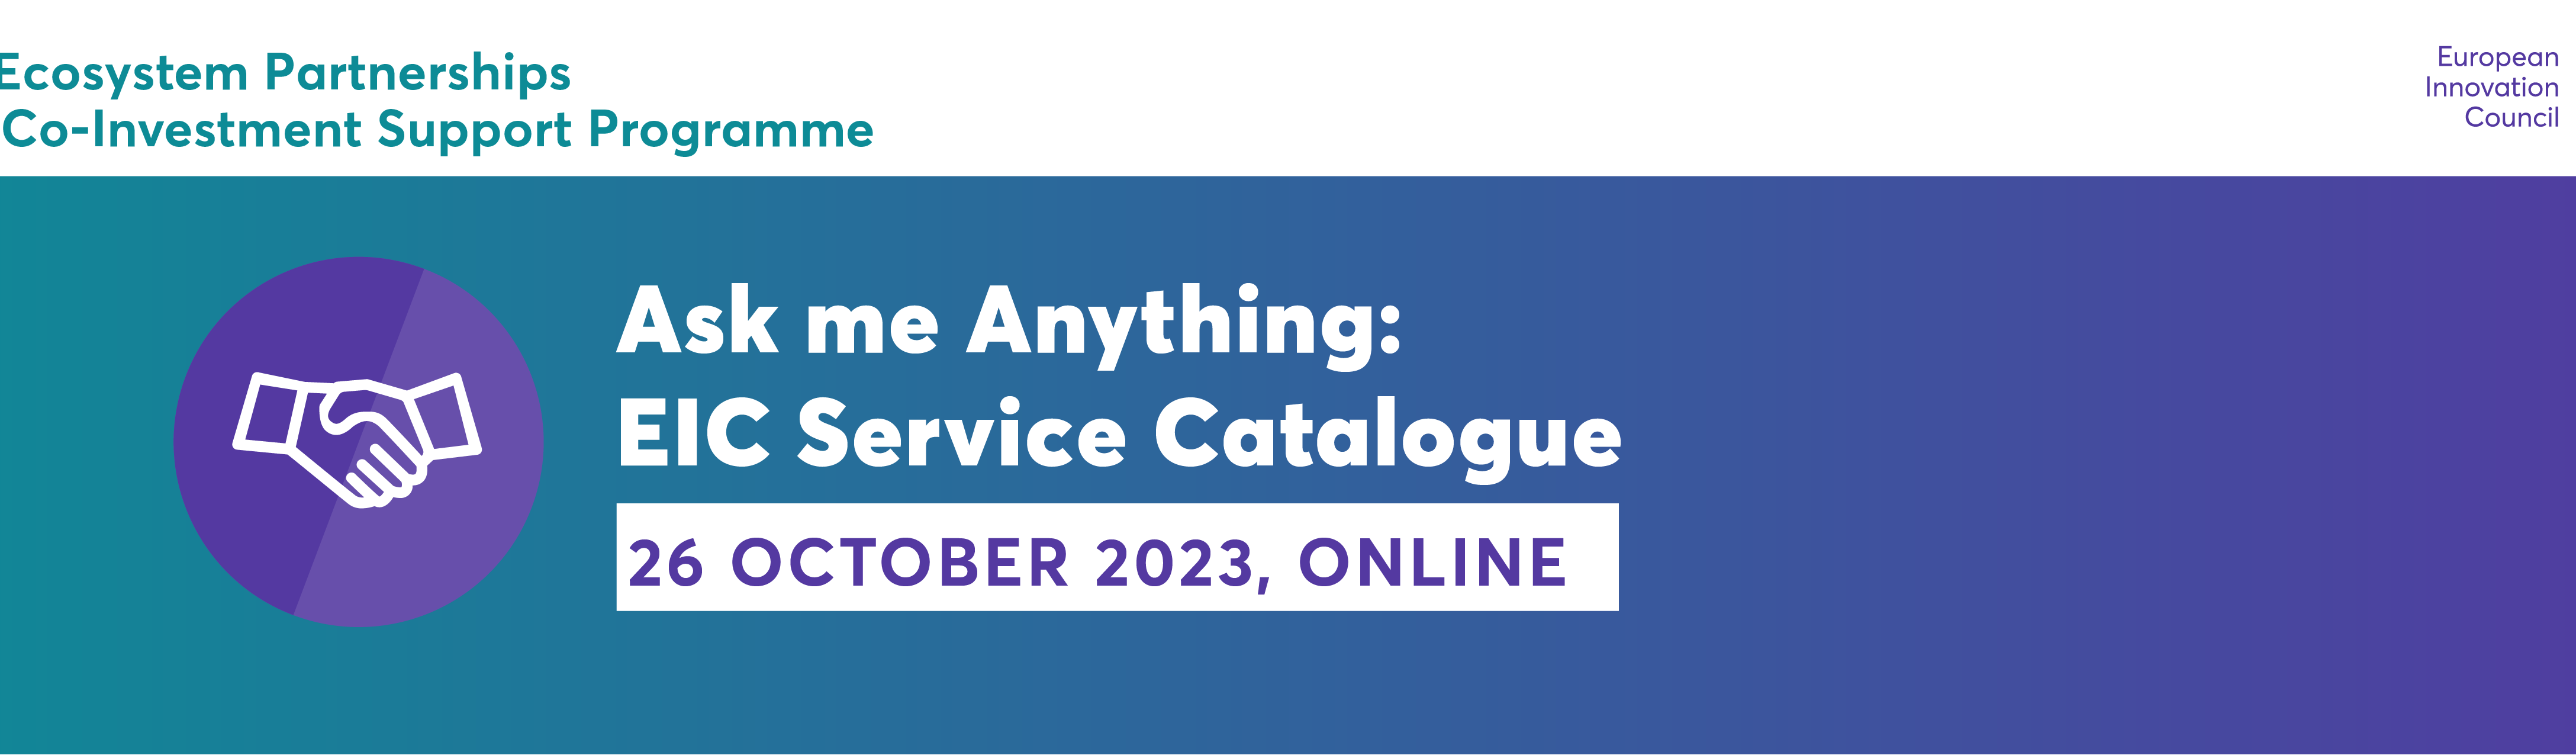 EIC Service Catalogue Ask me Anything 26 October